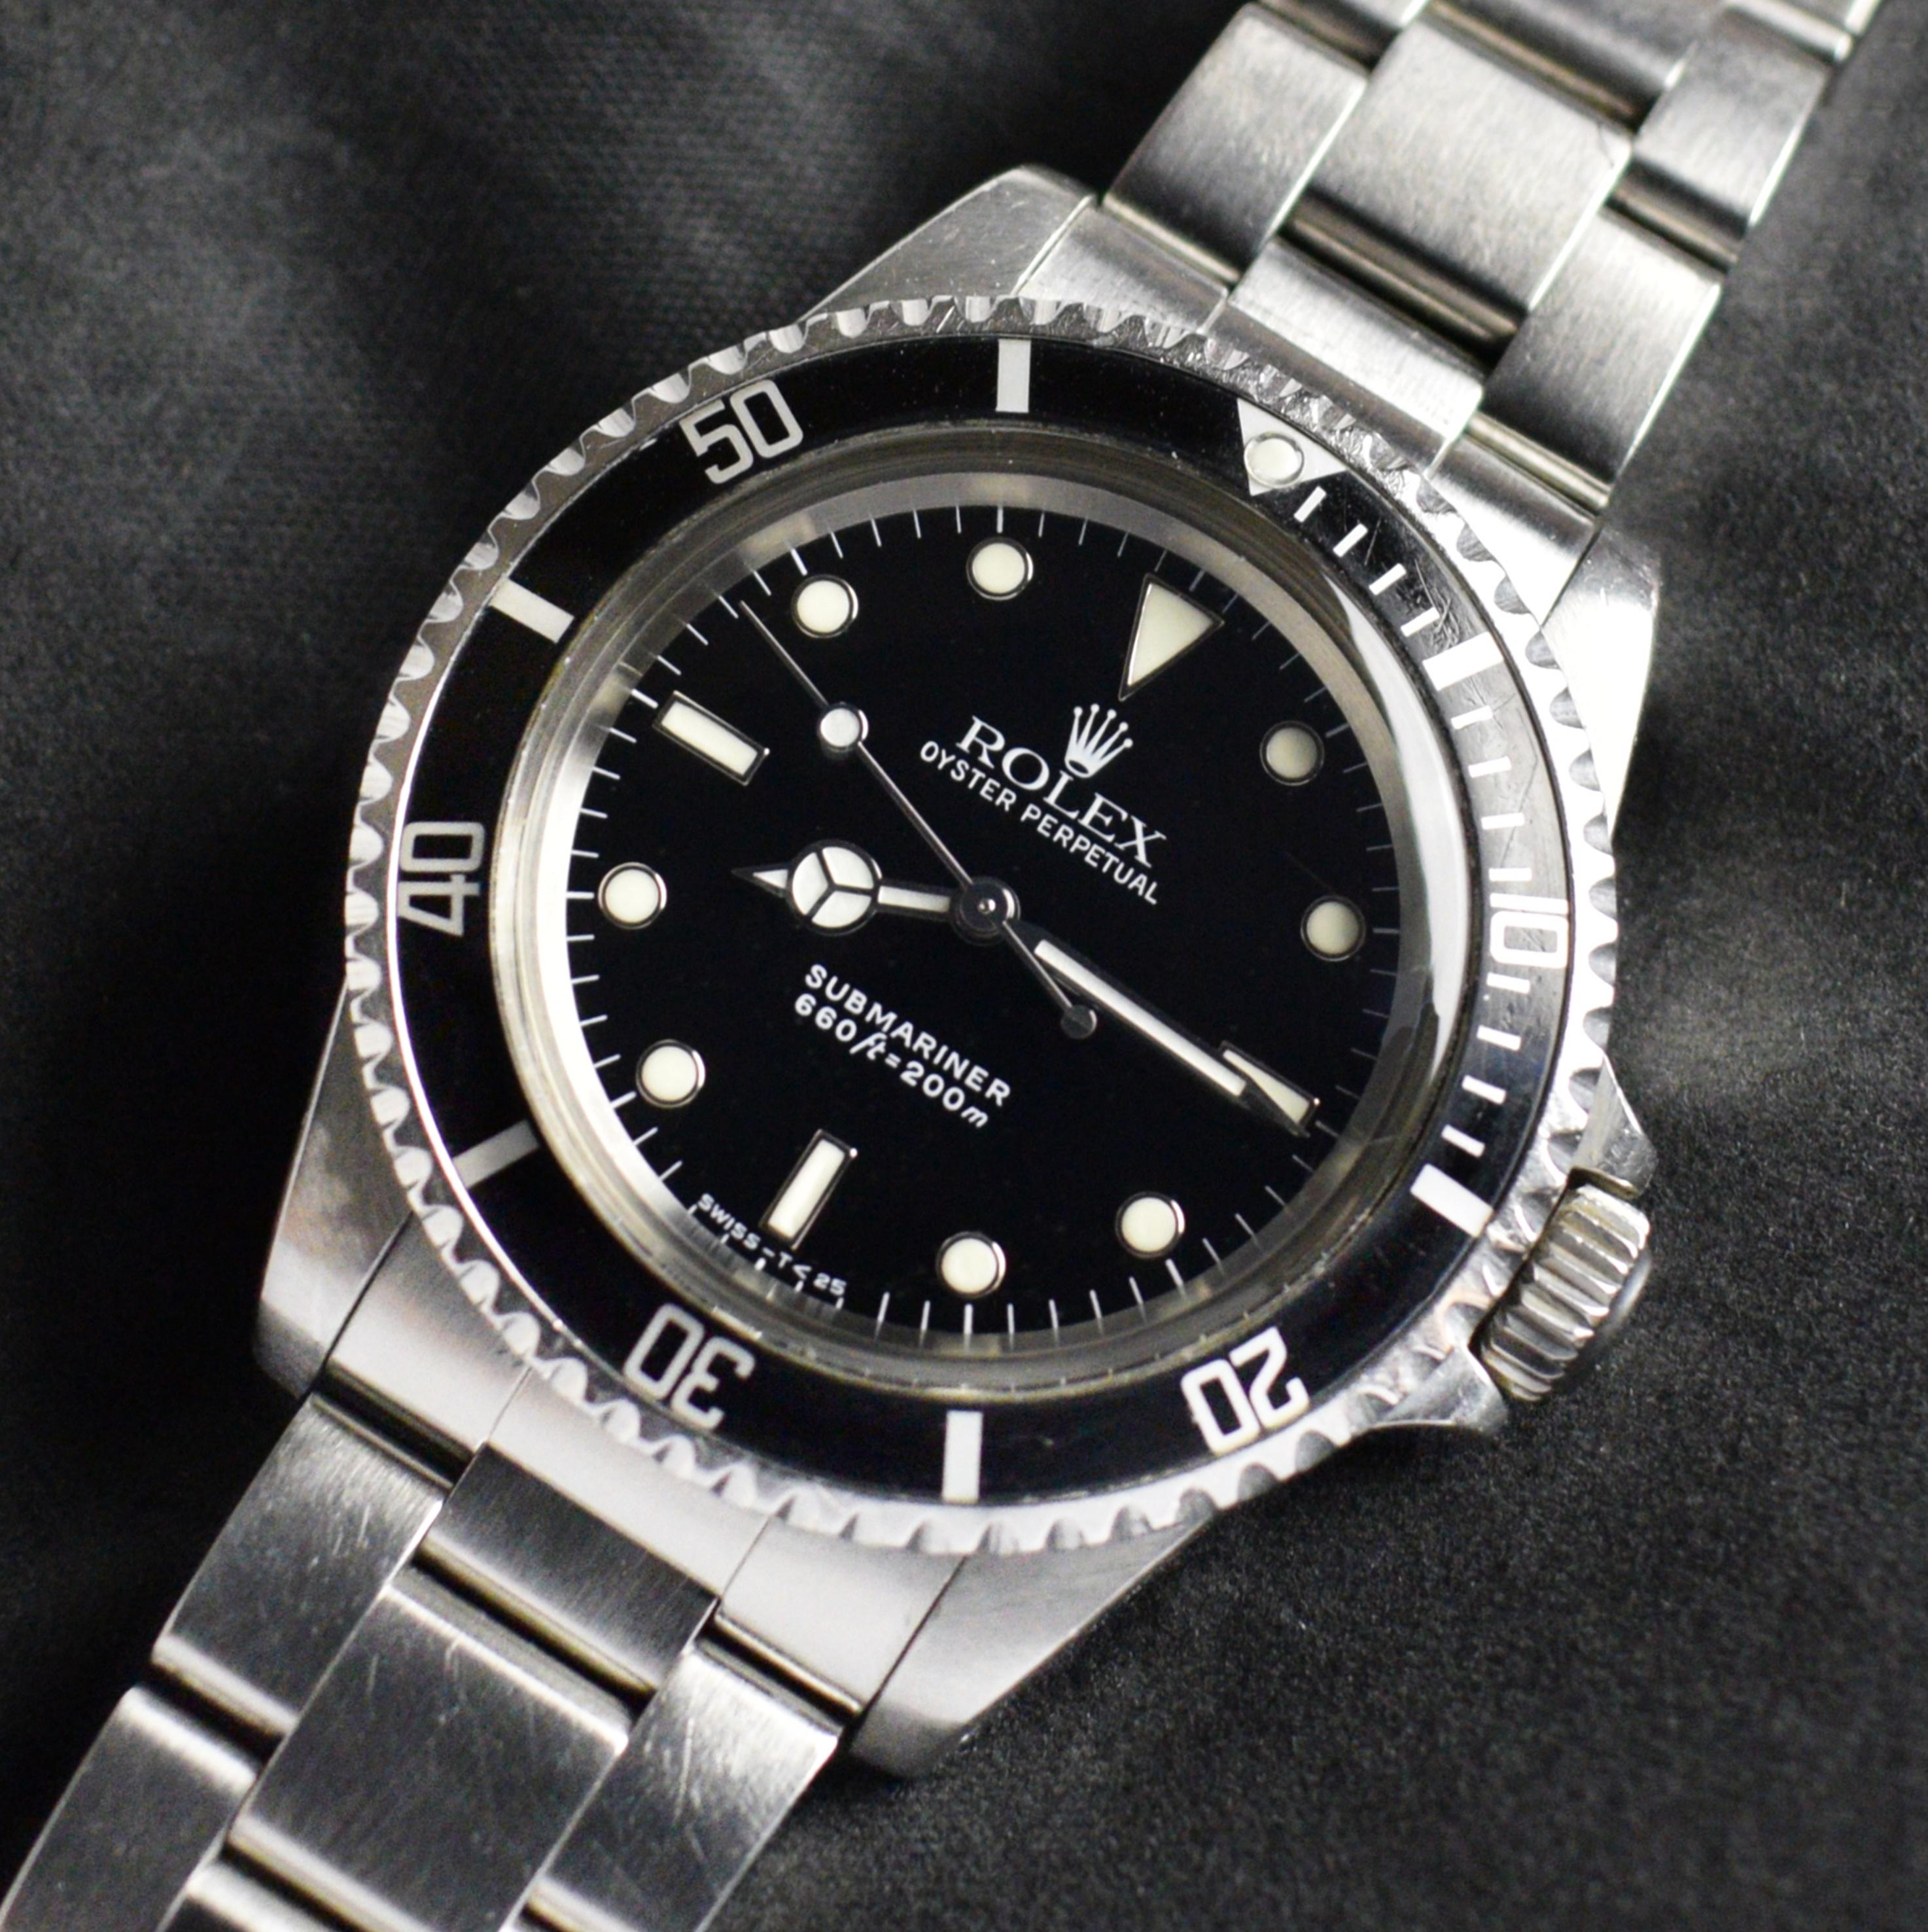 Brand: Vintage Rolex
Model: 5513
Year: 1985
Serial number: 86xxxxx
Reference: C03607; C03635

Case: Show sign of wear with slight polish from previous; inner case back stamped 5512

Dial: Excellent Condition Black Glossy T<25 Dial where the dial has